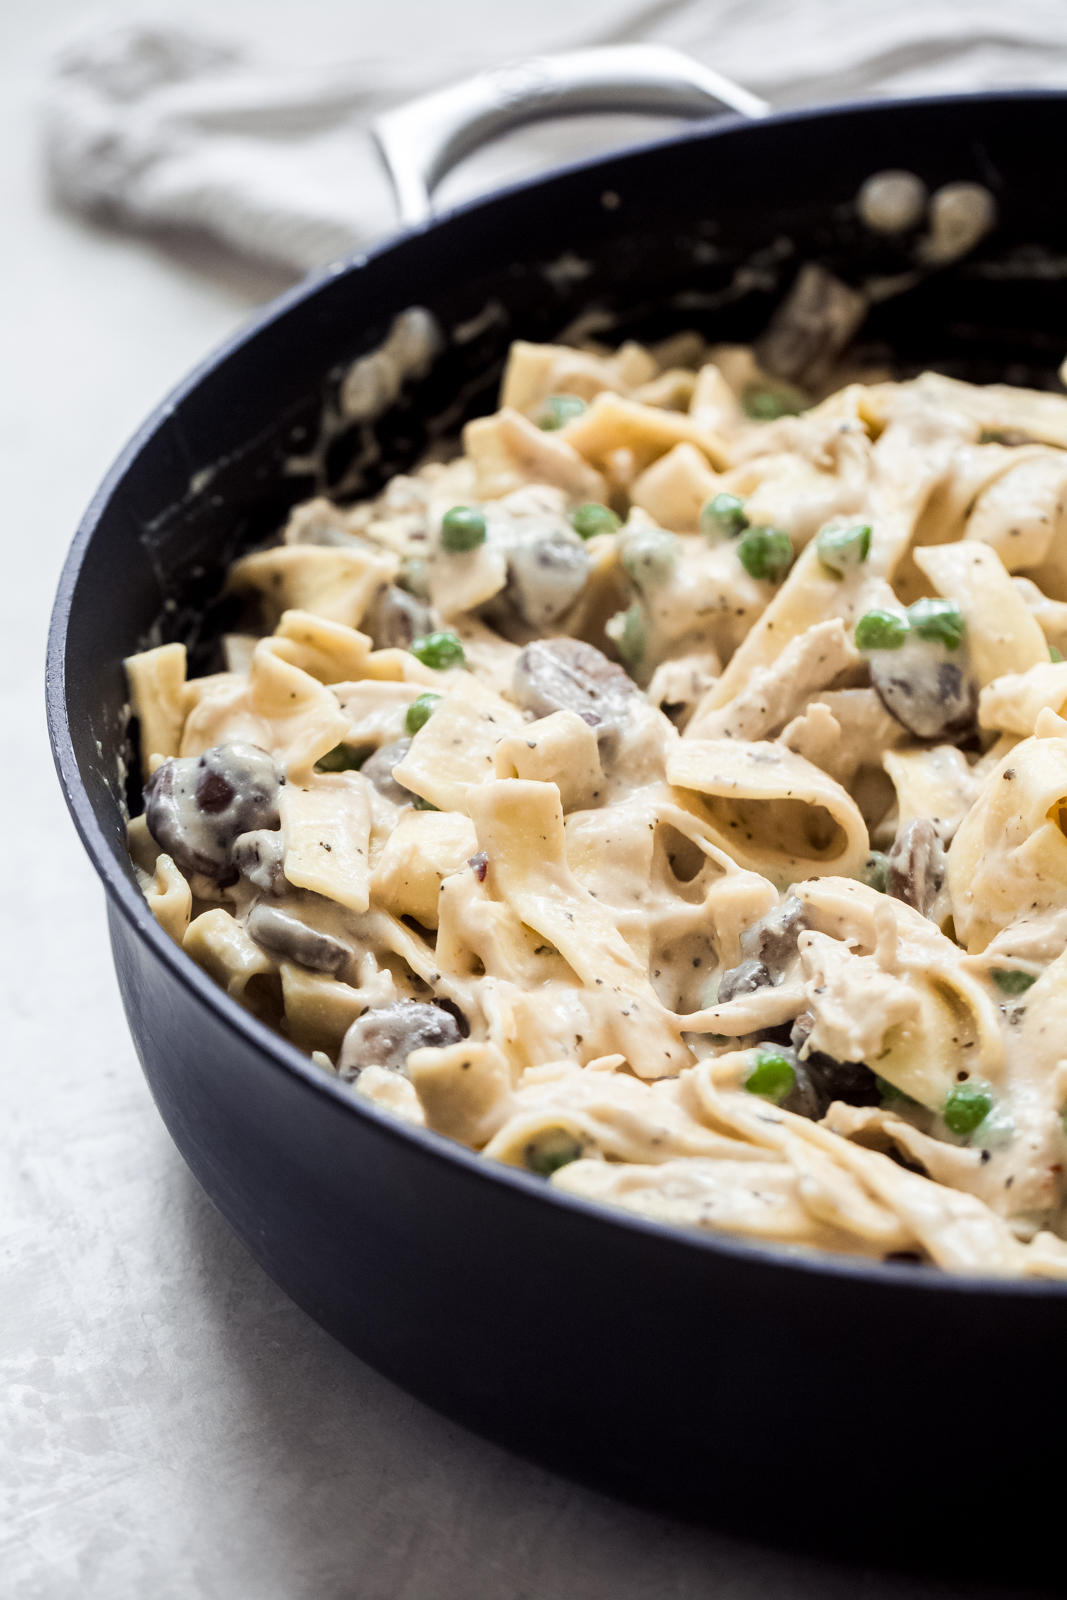 noodles, peas, turkey, and mushrooms in a creamy sauce